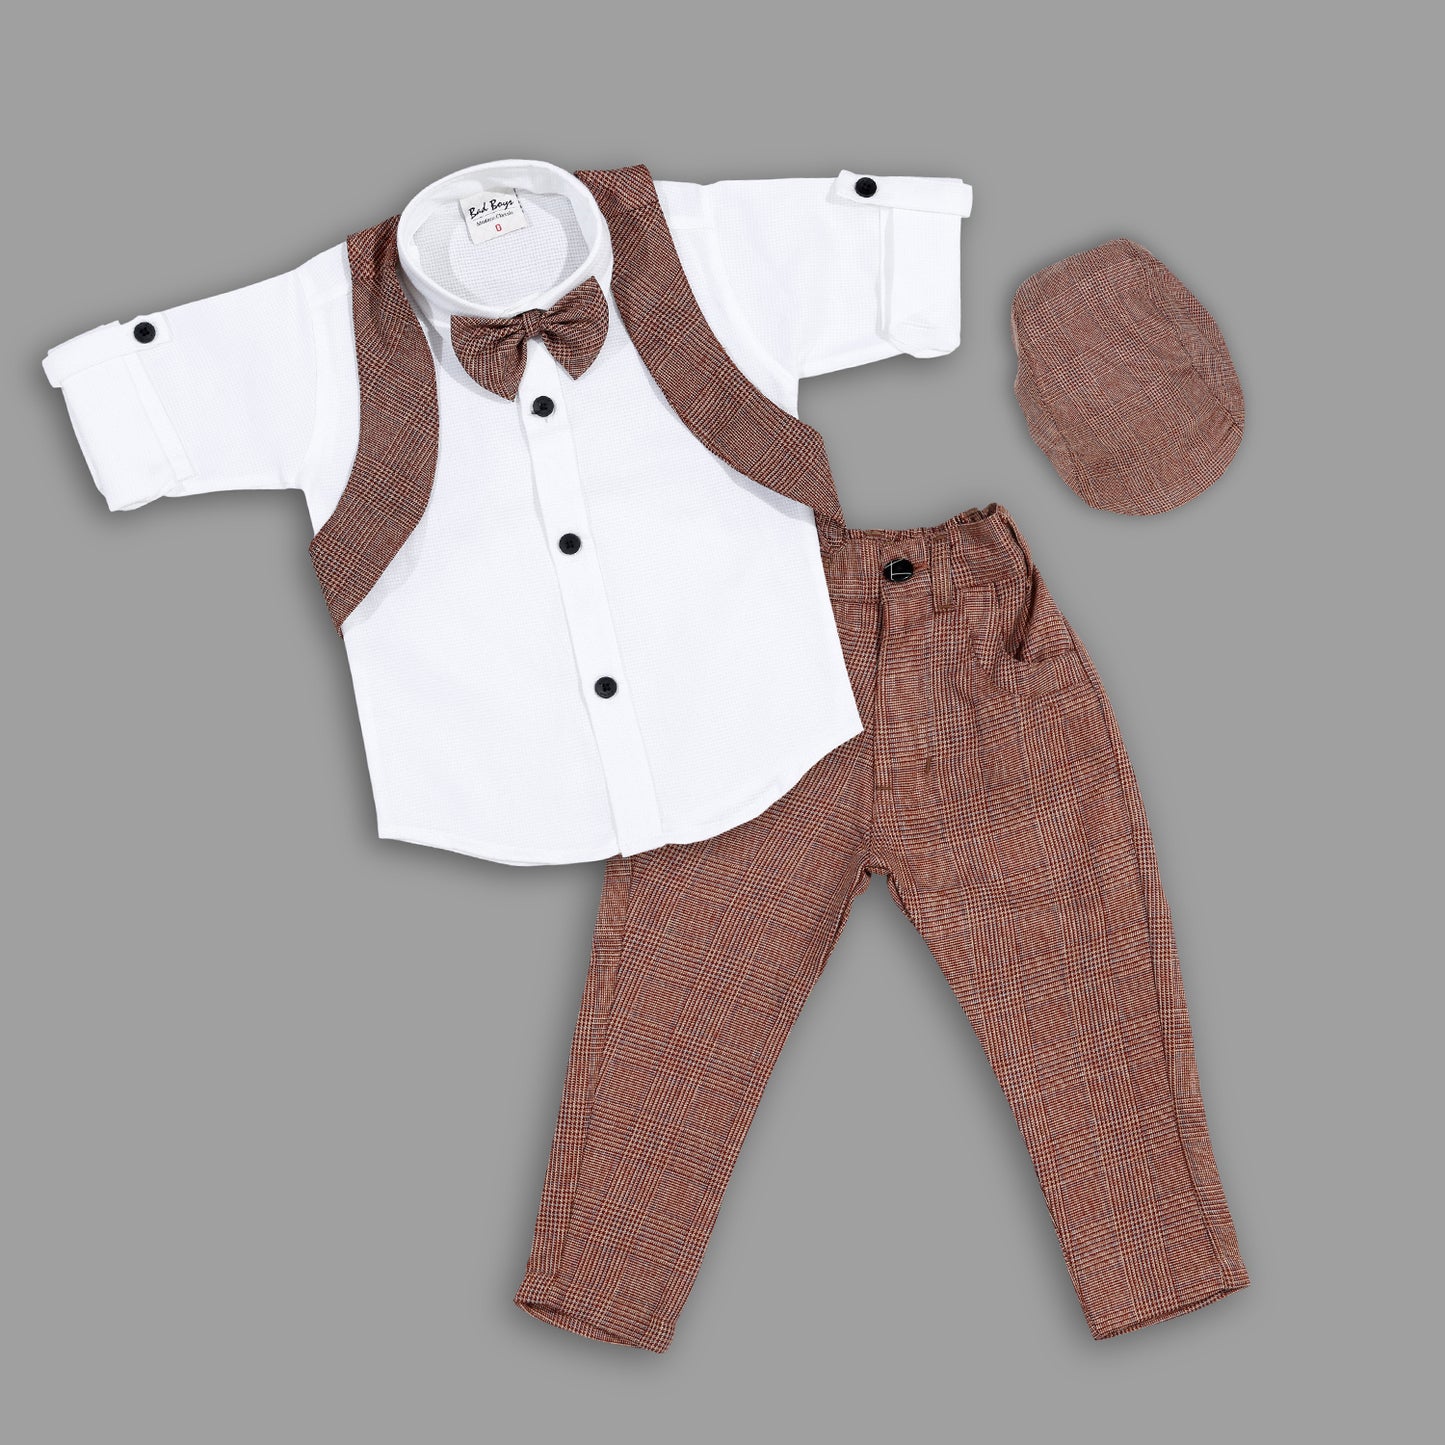 Bad Boys Stylish and Comfortable Outfit with Cotton Shirt and Cotton Bottoms - mashup boys